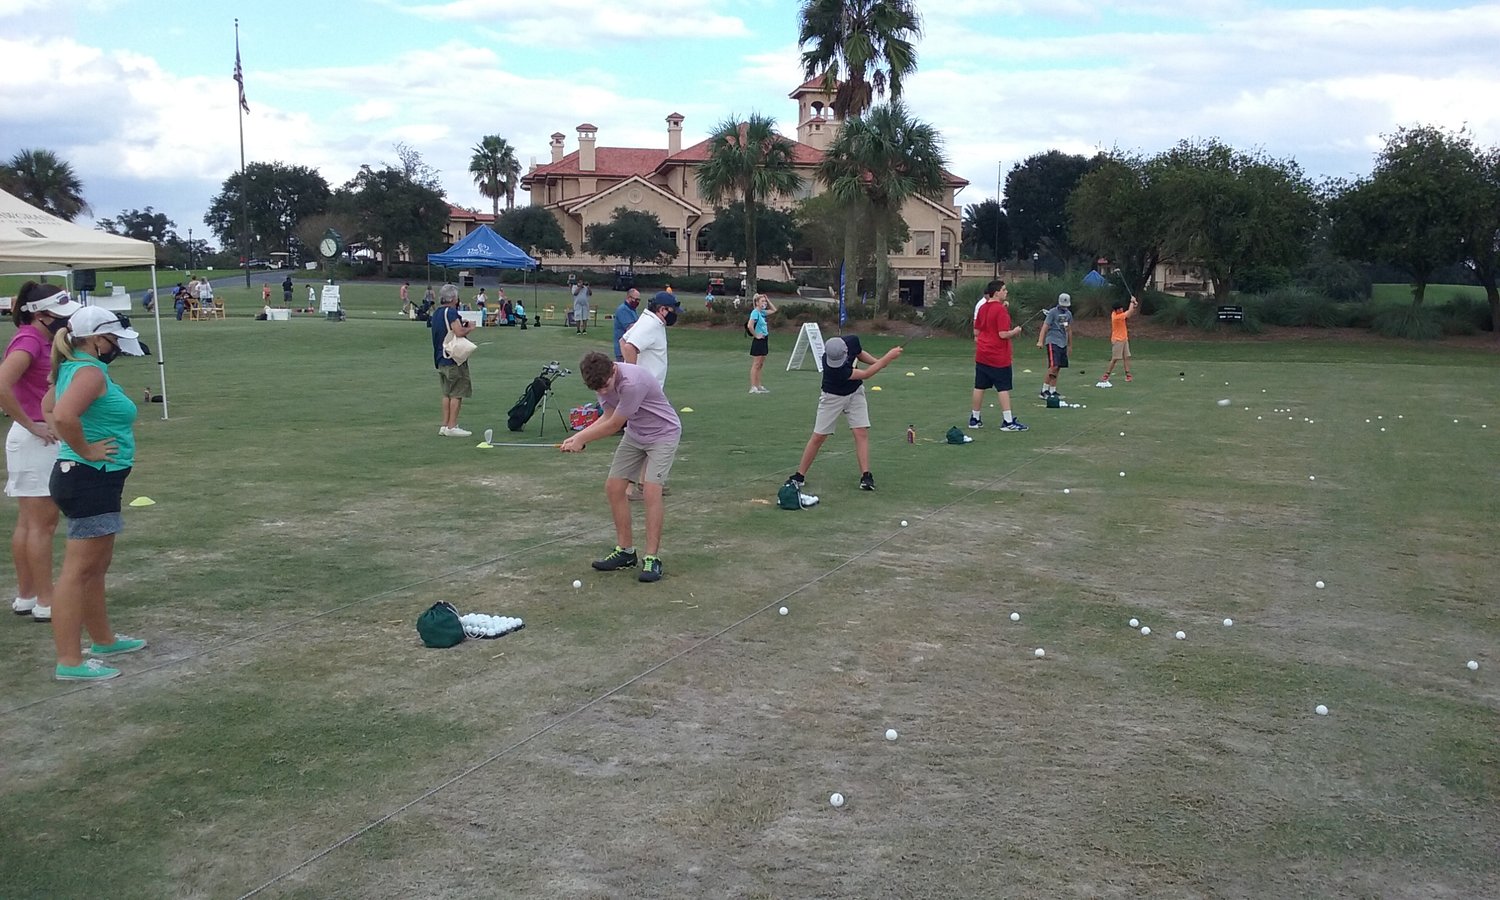 Children and youths with special needs were treated to a day of fun at TPC Sawgrass this week during the Tesori Family Foundation’s All-Star Kids Clinic.